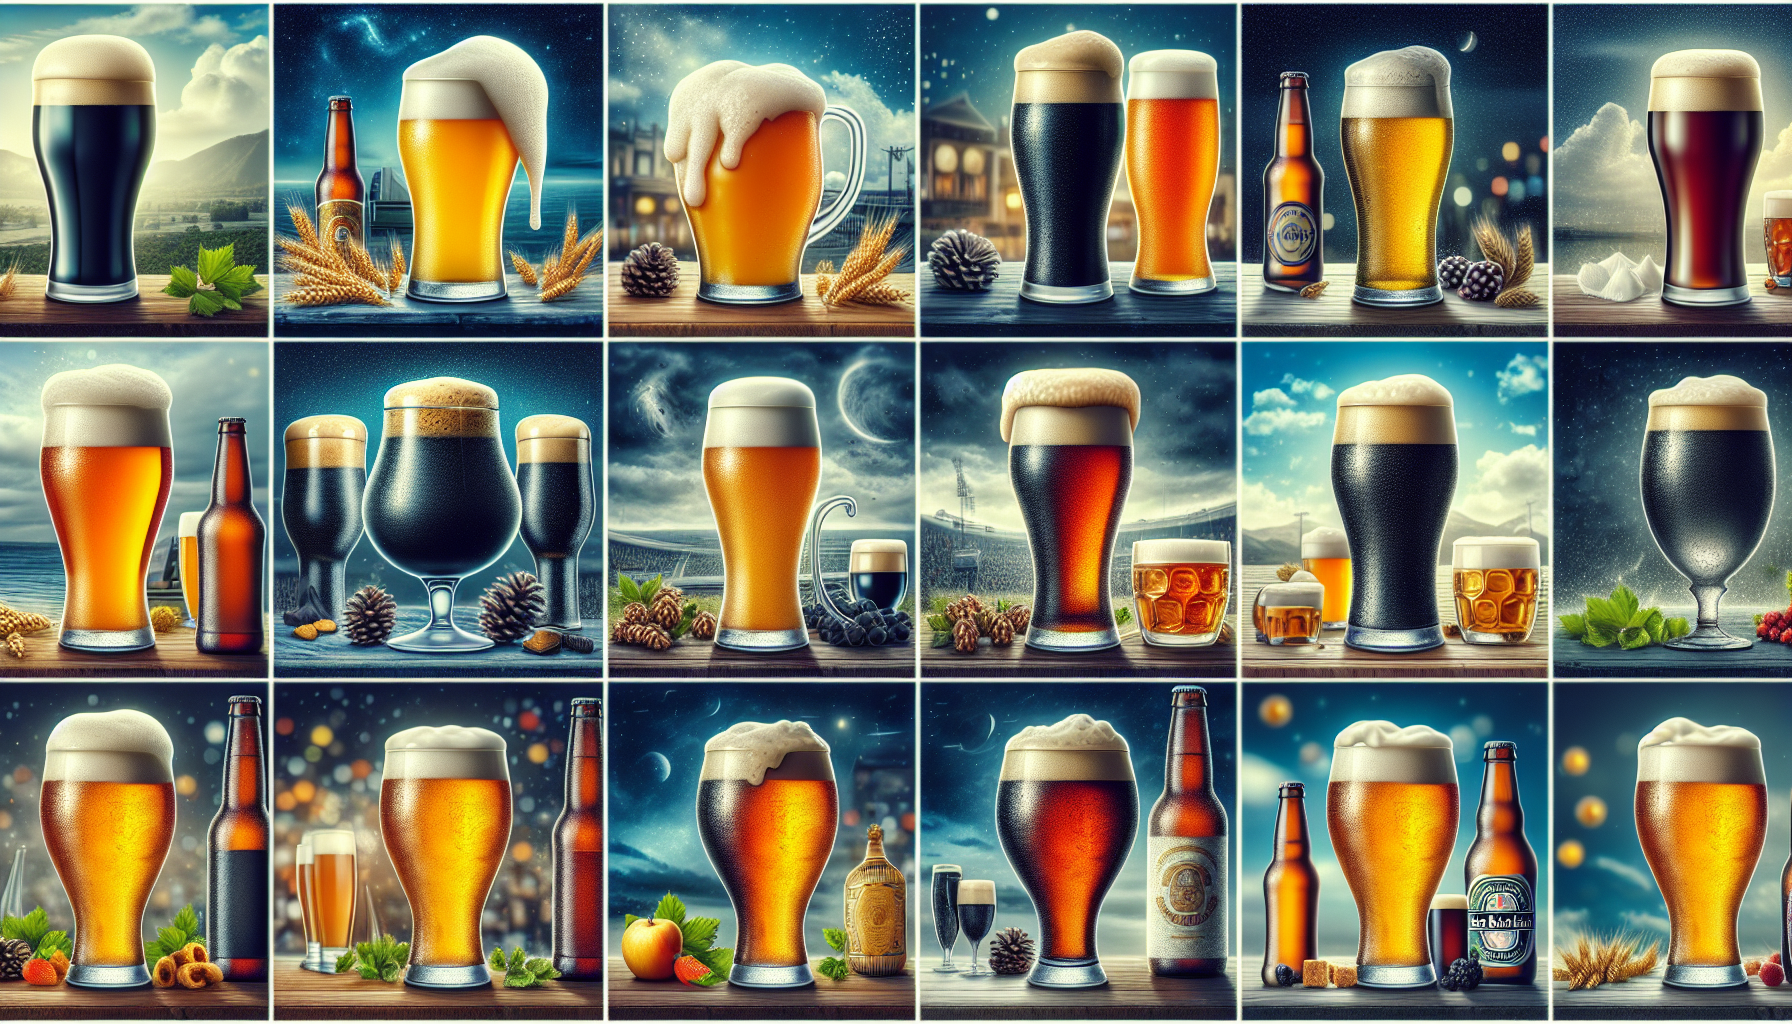 What Are the Most Popular Beer Styles?